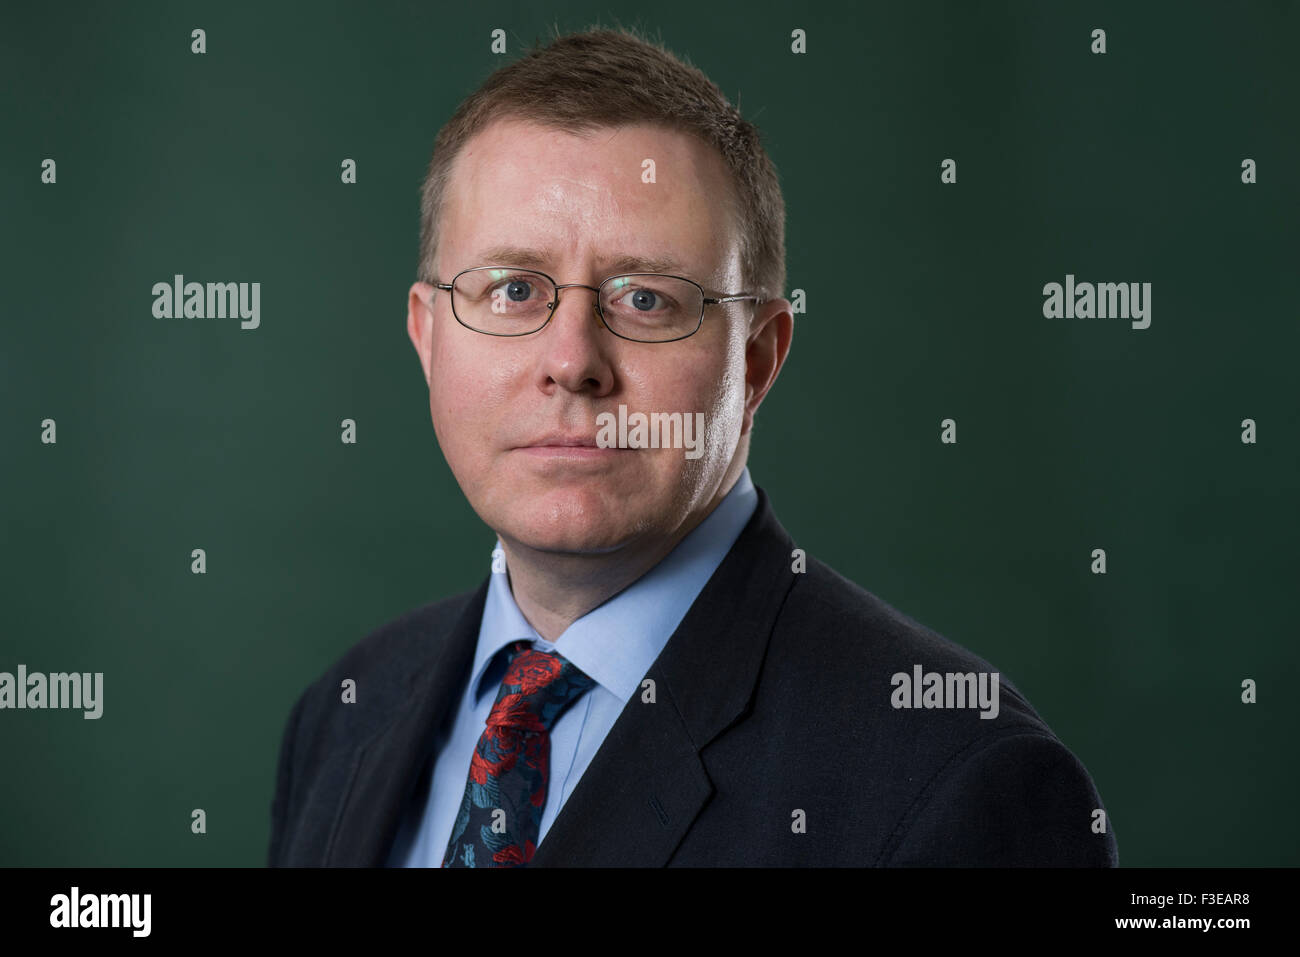 Biograf Andrew Biswell. Stockfoto